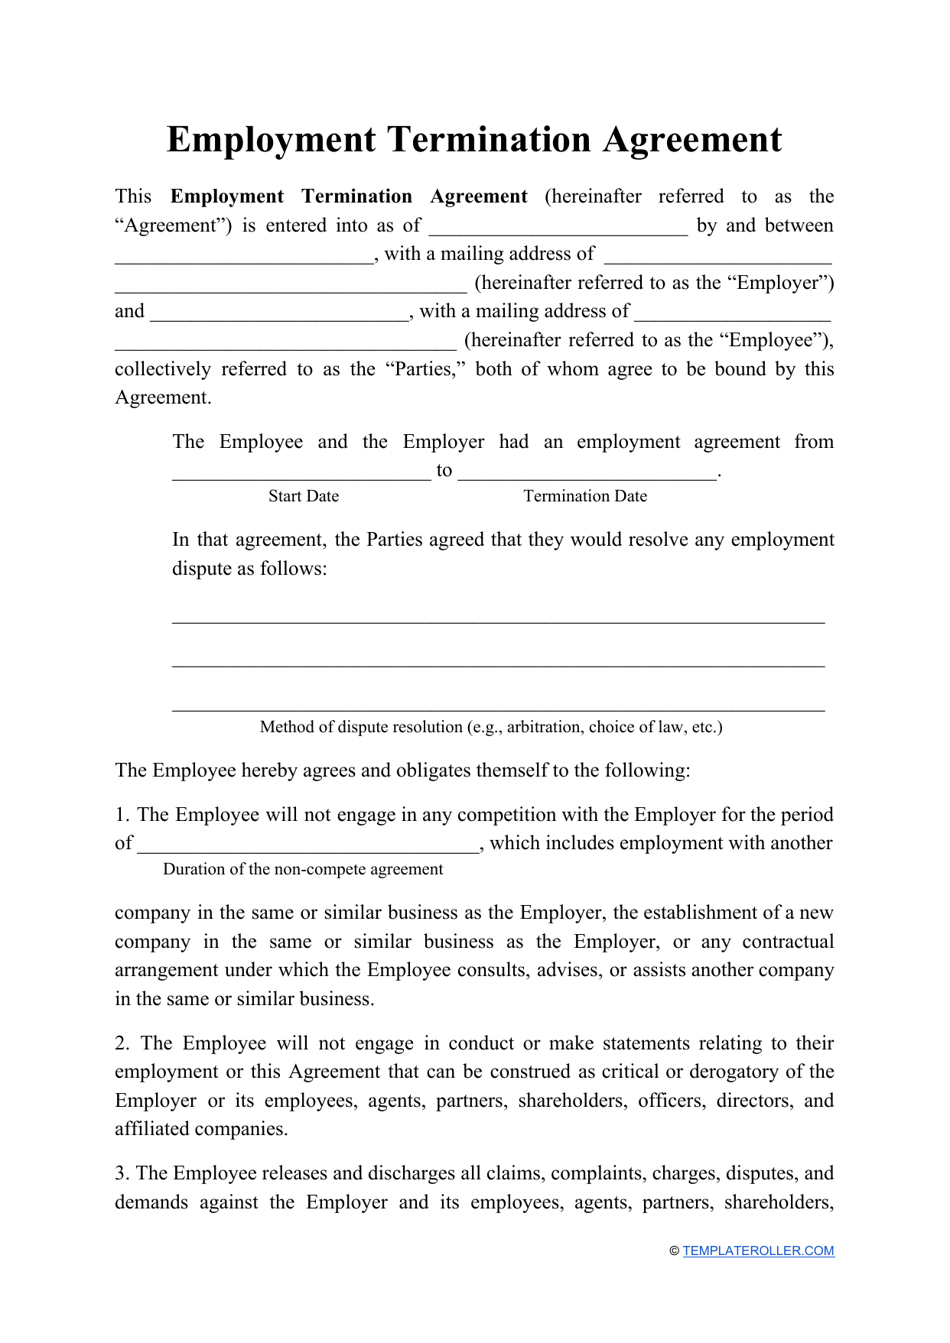 Employment Termination Agreement Template, Page 1